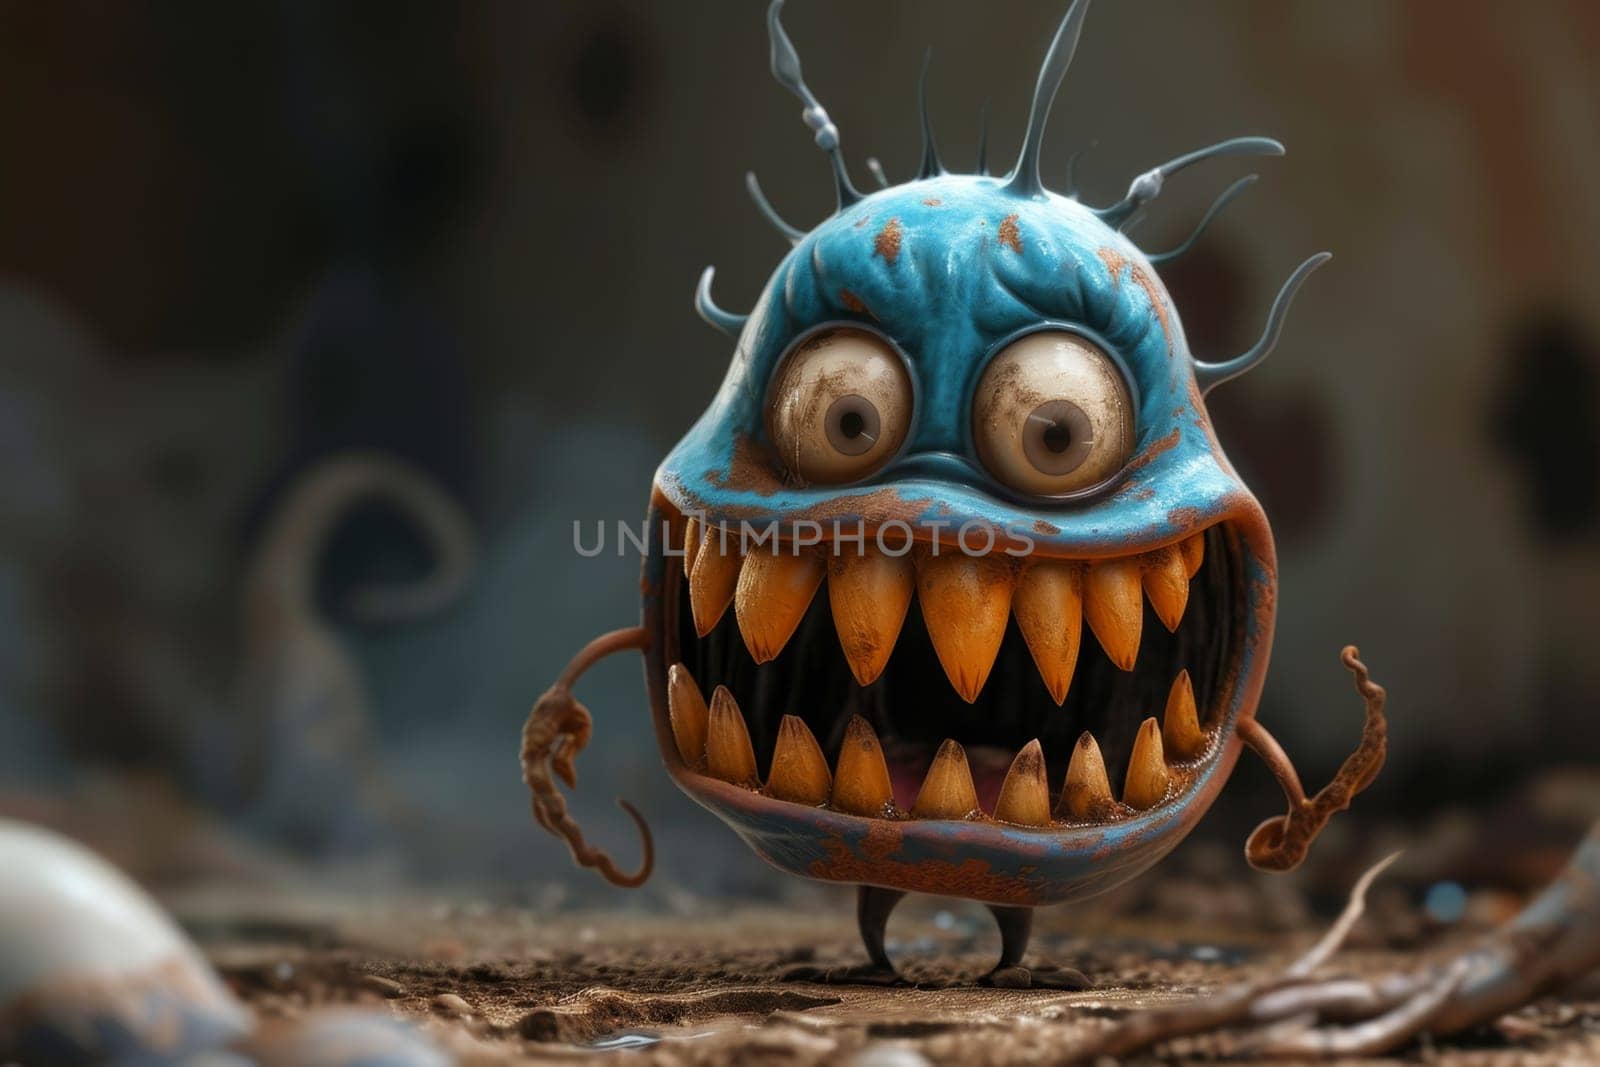 The cartoon toothy character is smiling with all his teeth. 3d illustration.